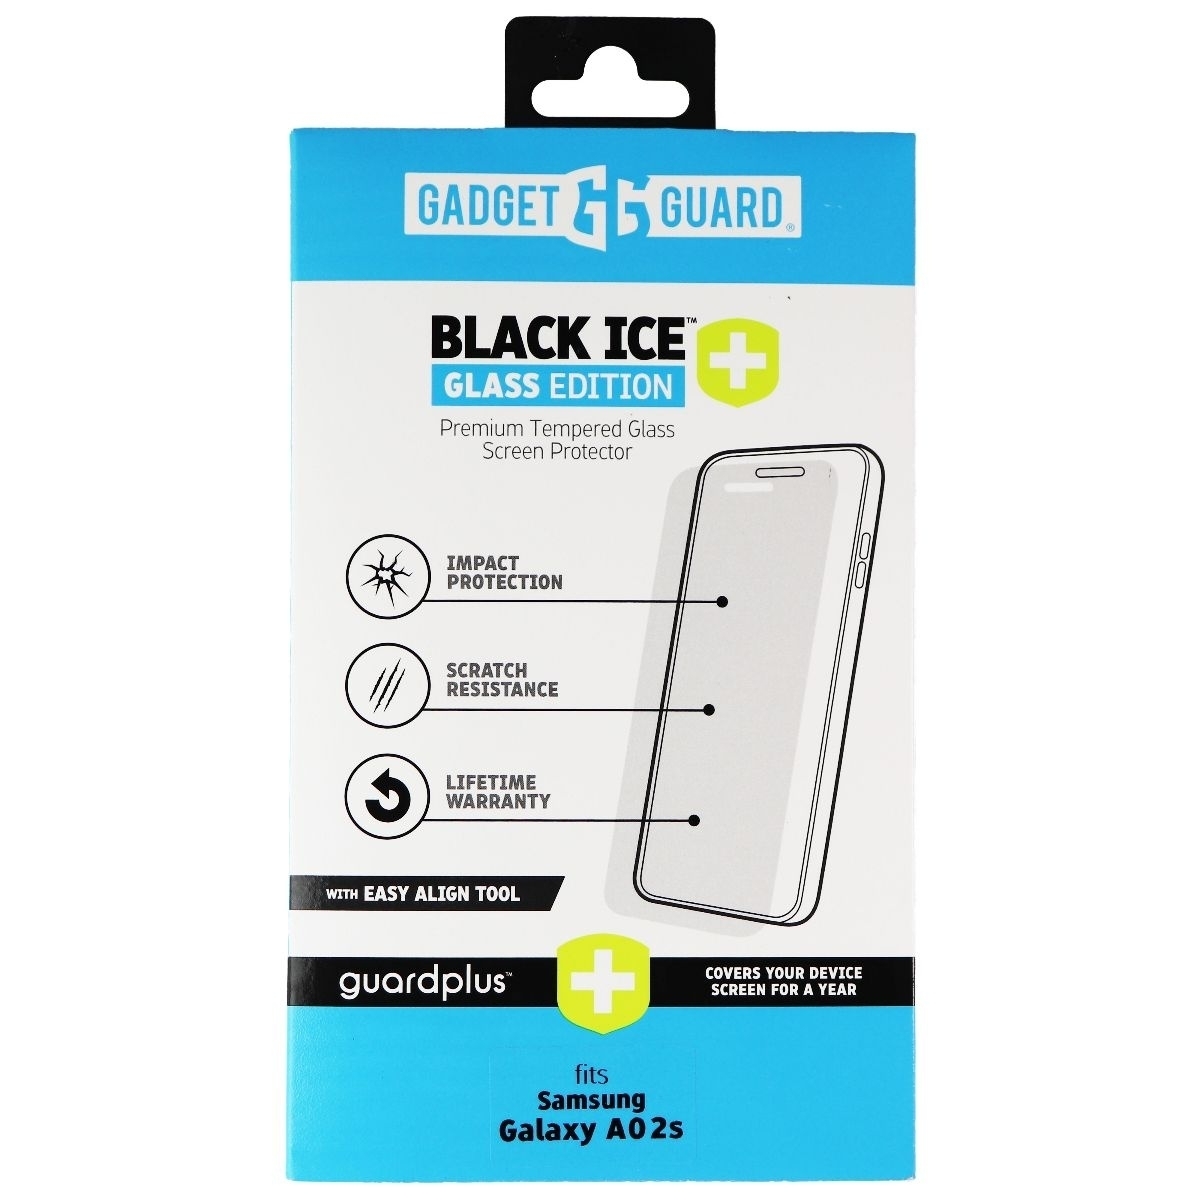 Gadget Guard Black Ice+ (Plus) Glass Edition For Samsung Galaxy A02s - Clear